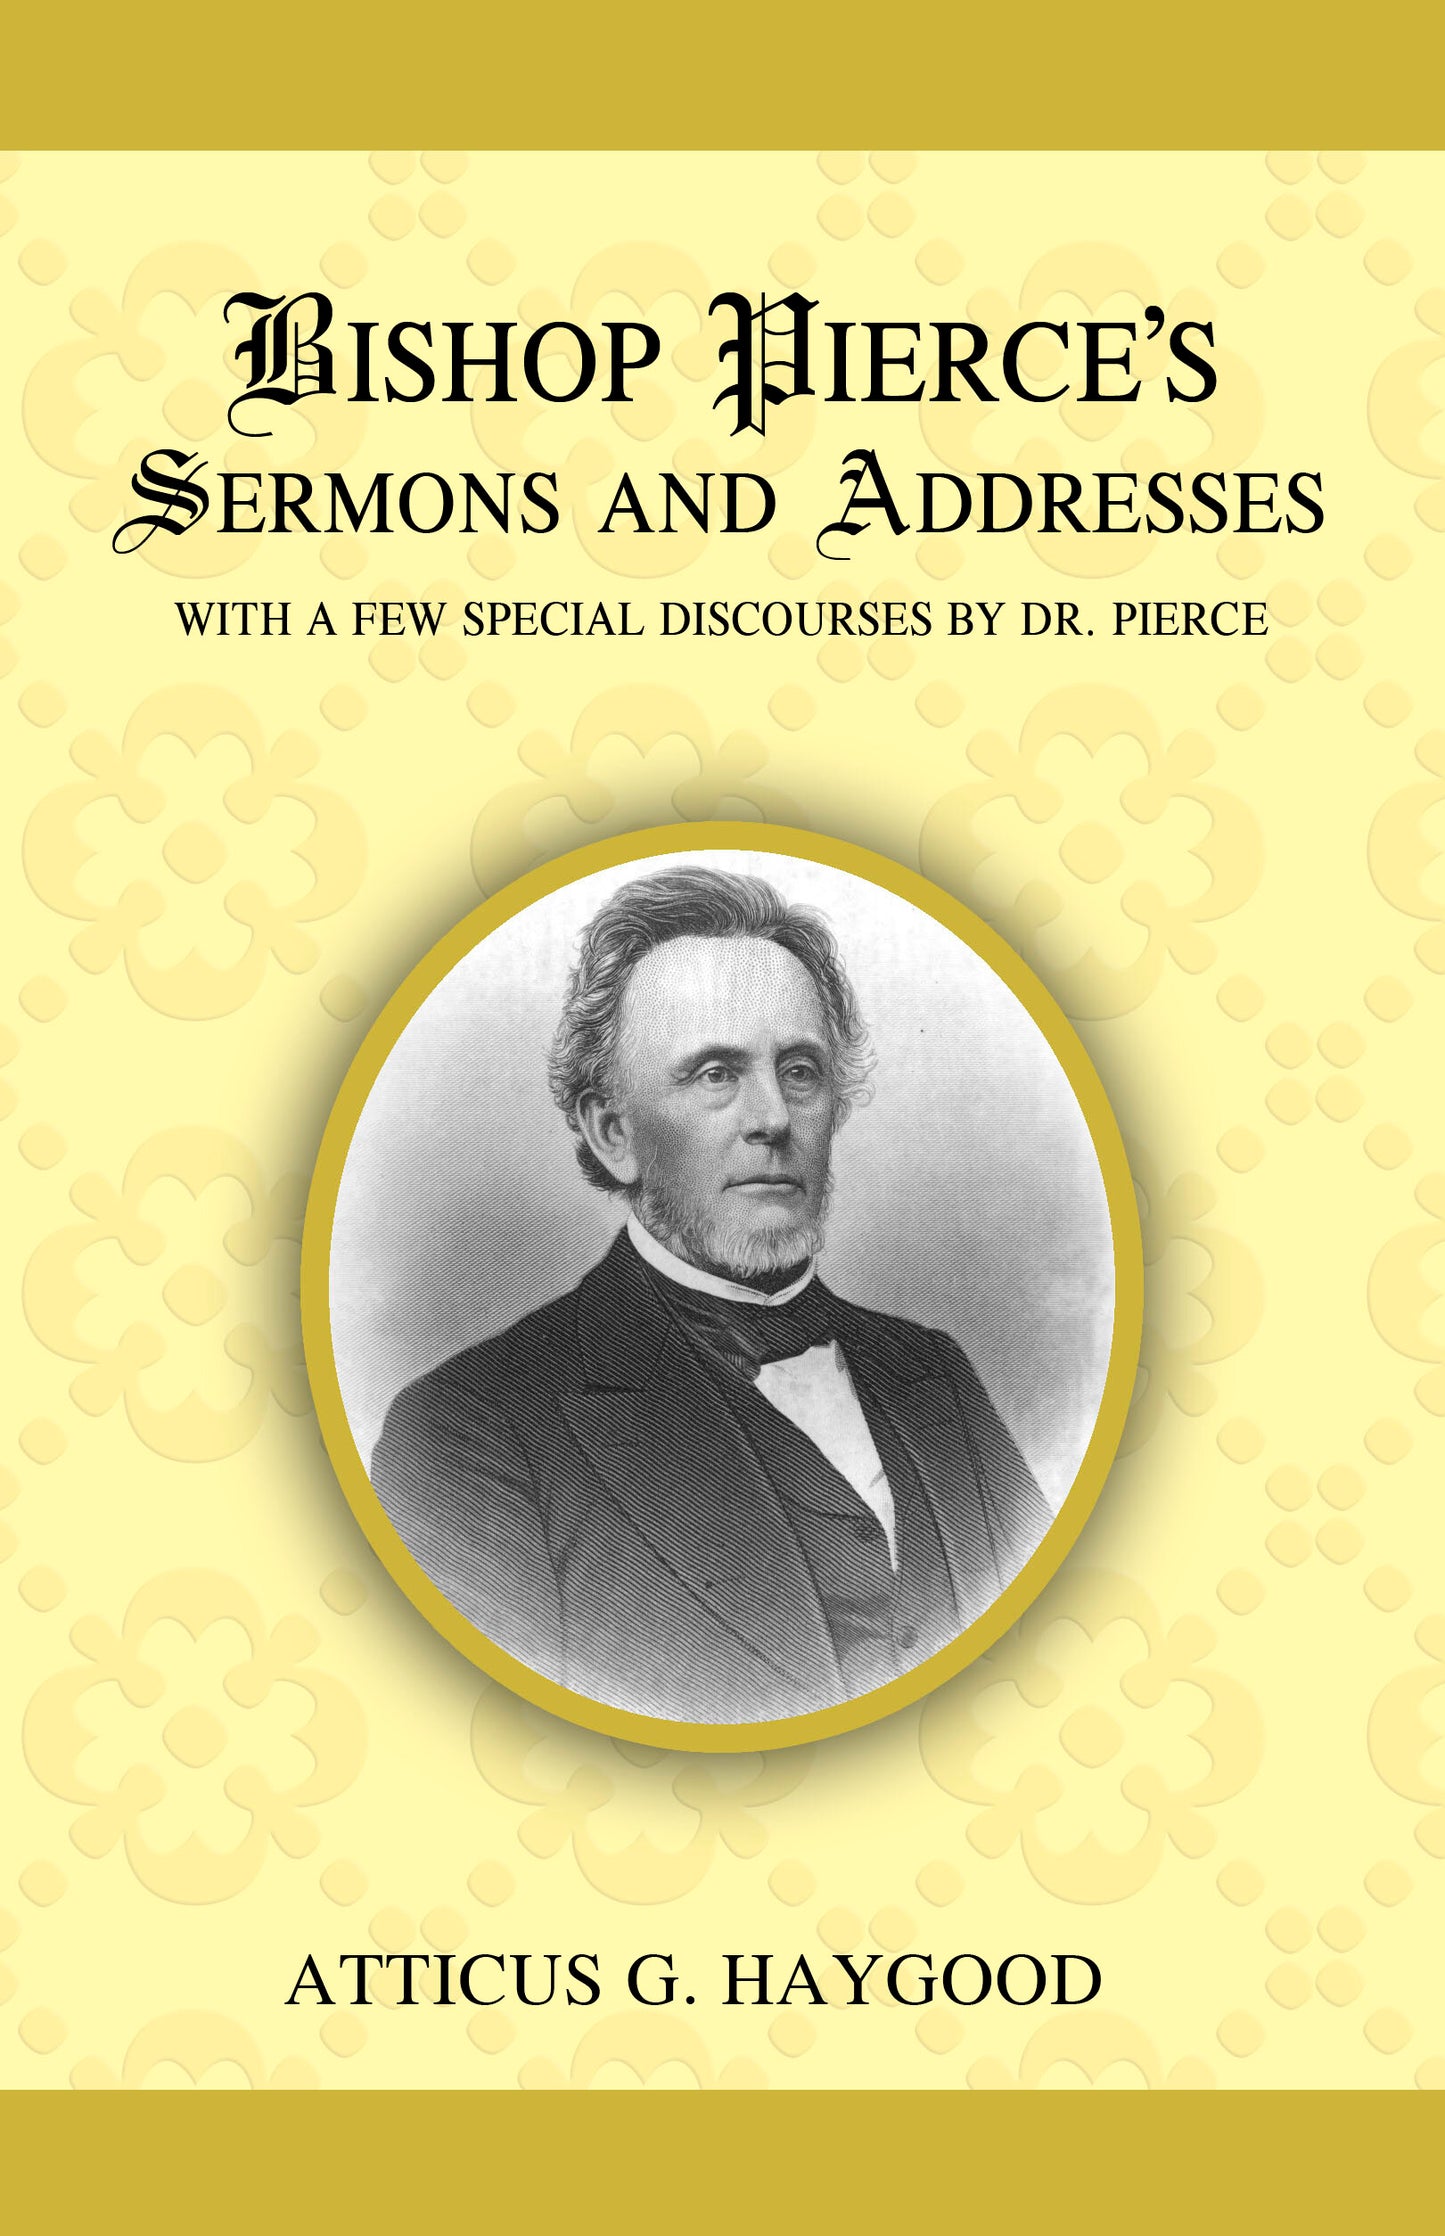 Bishop Pierce's Sermons and Addresses with a Few Special Discourses by Dr. Pierce